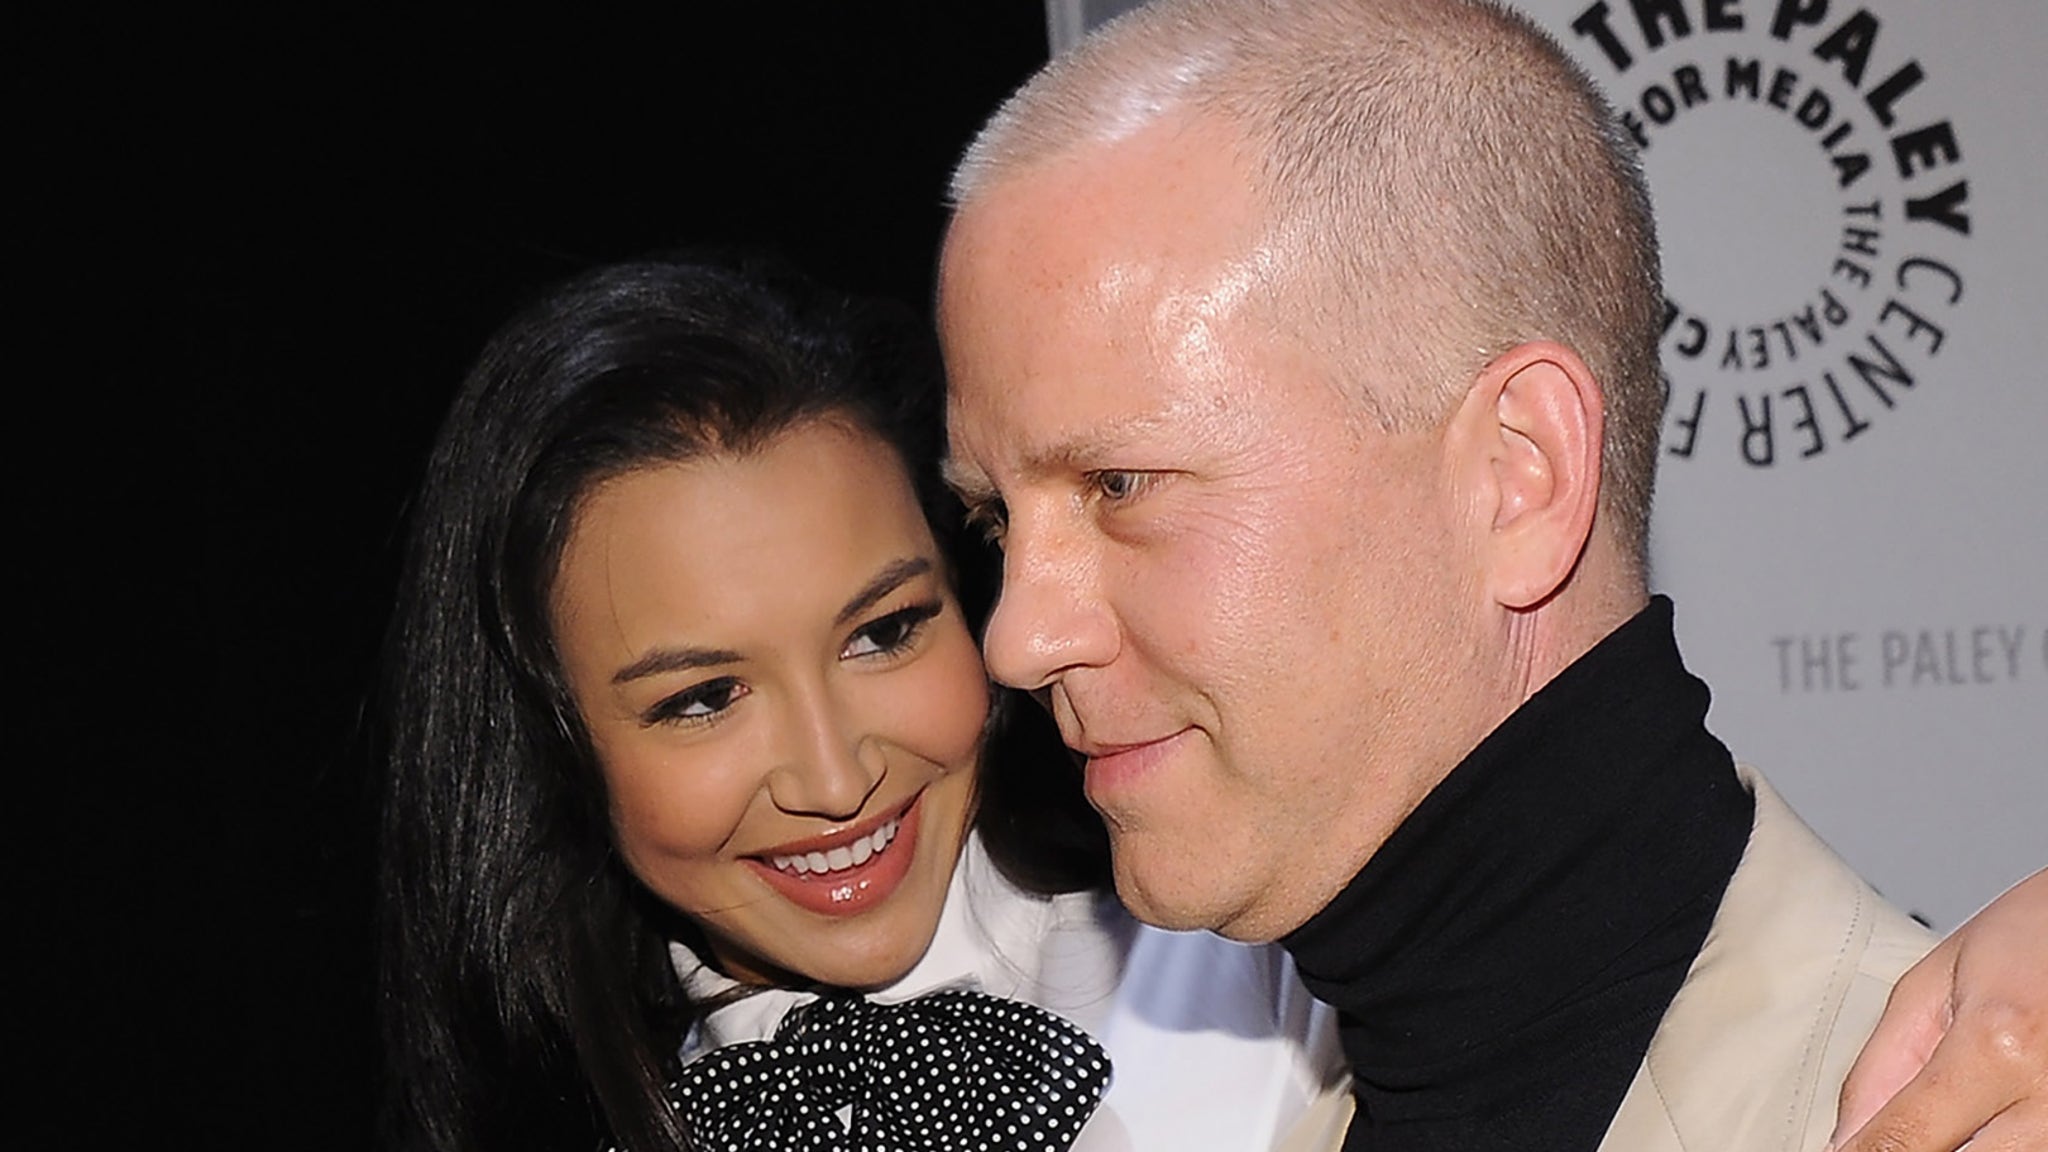 Ryan Murphy responds to Naya Rivera’s father saying he broke his promise to her son